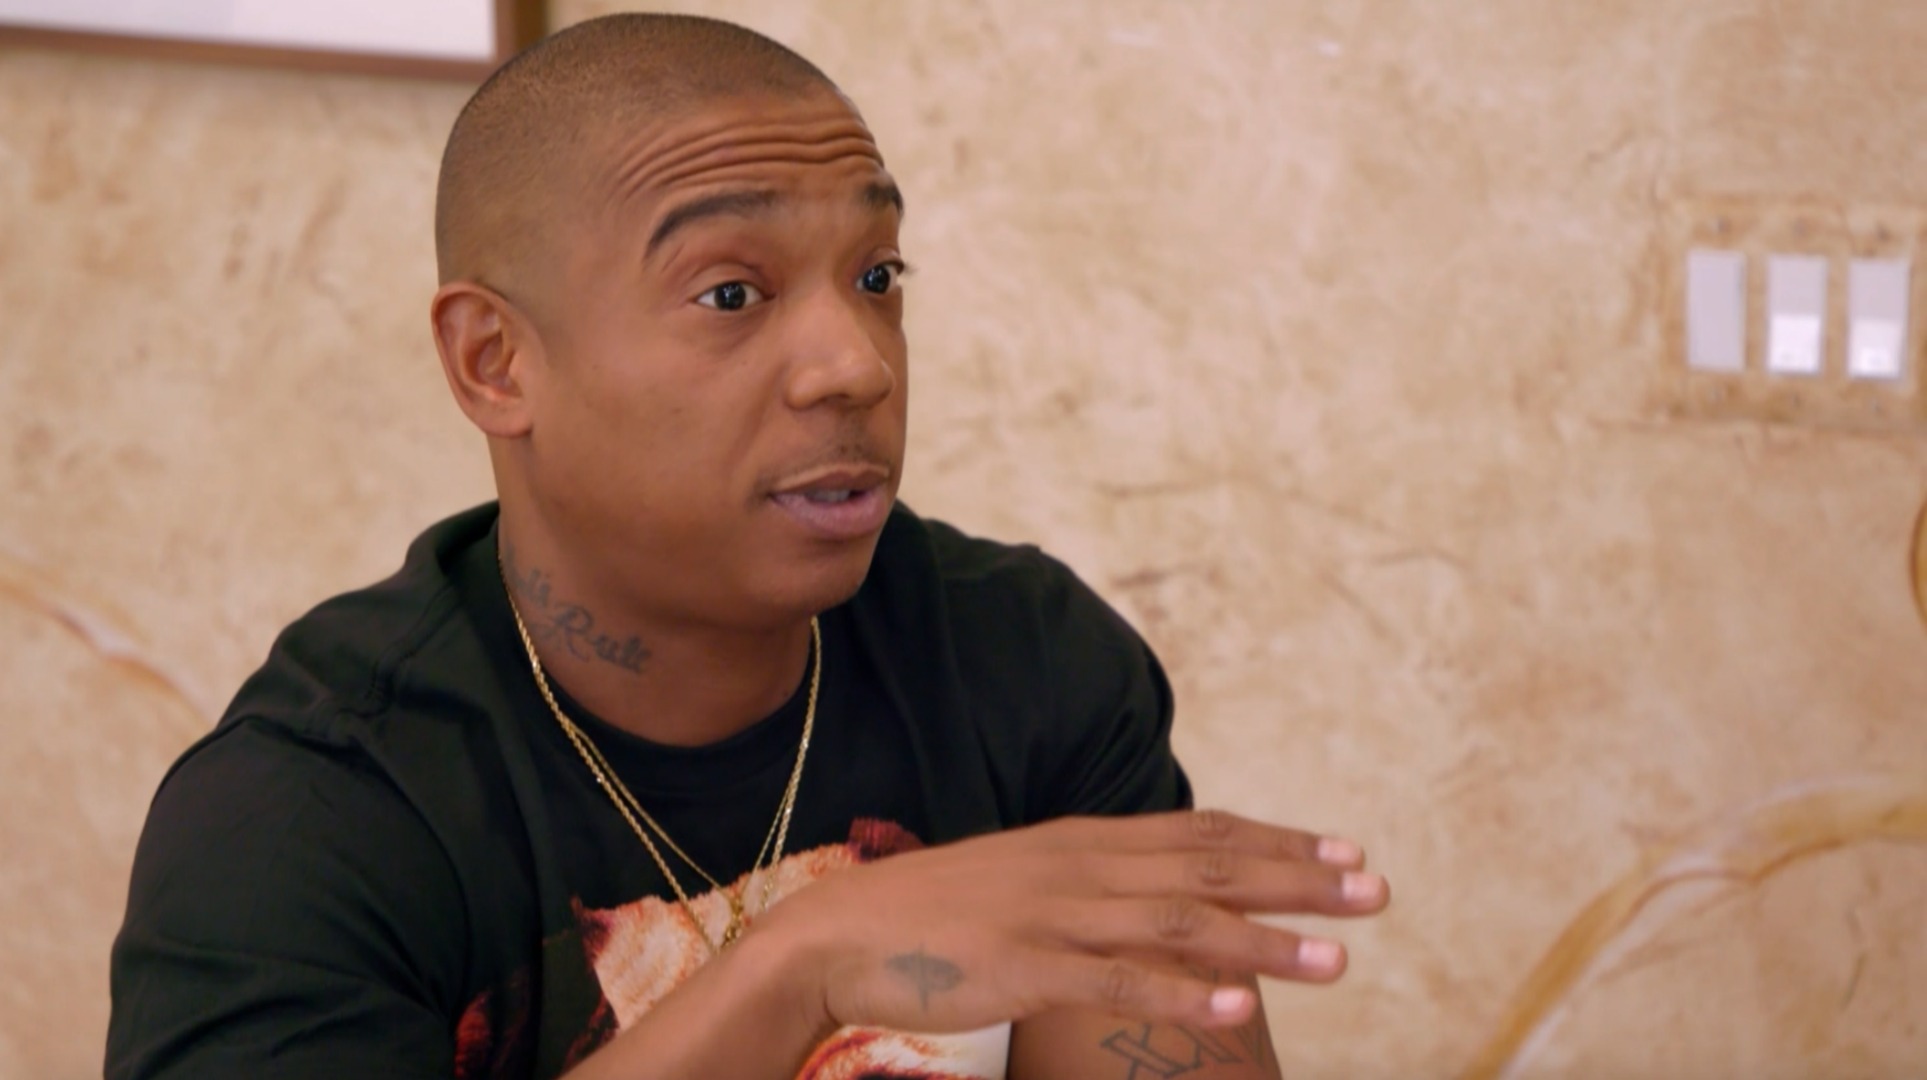 A First Look at "Growing Up Hip Hop: New York!"